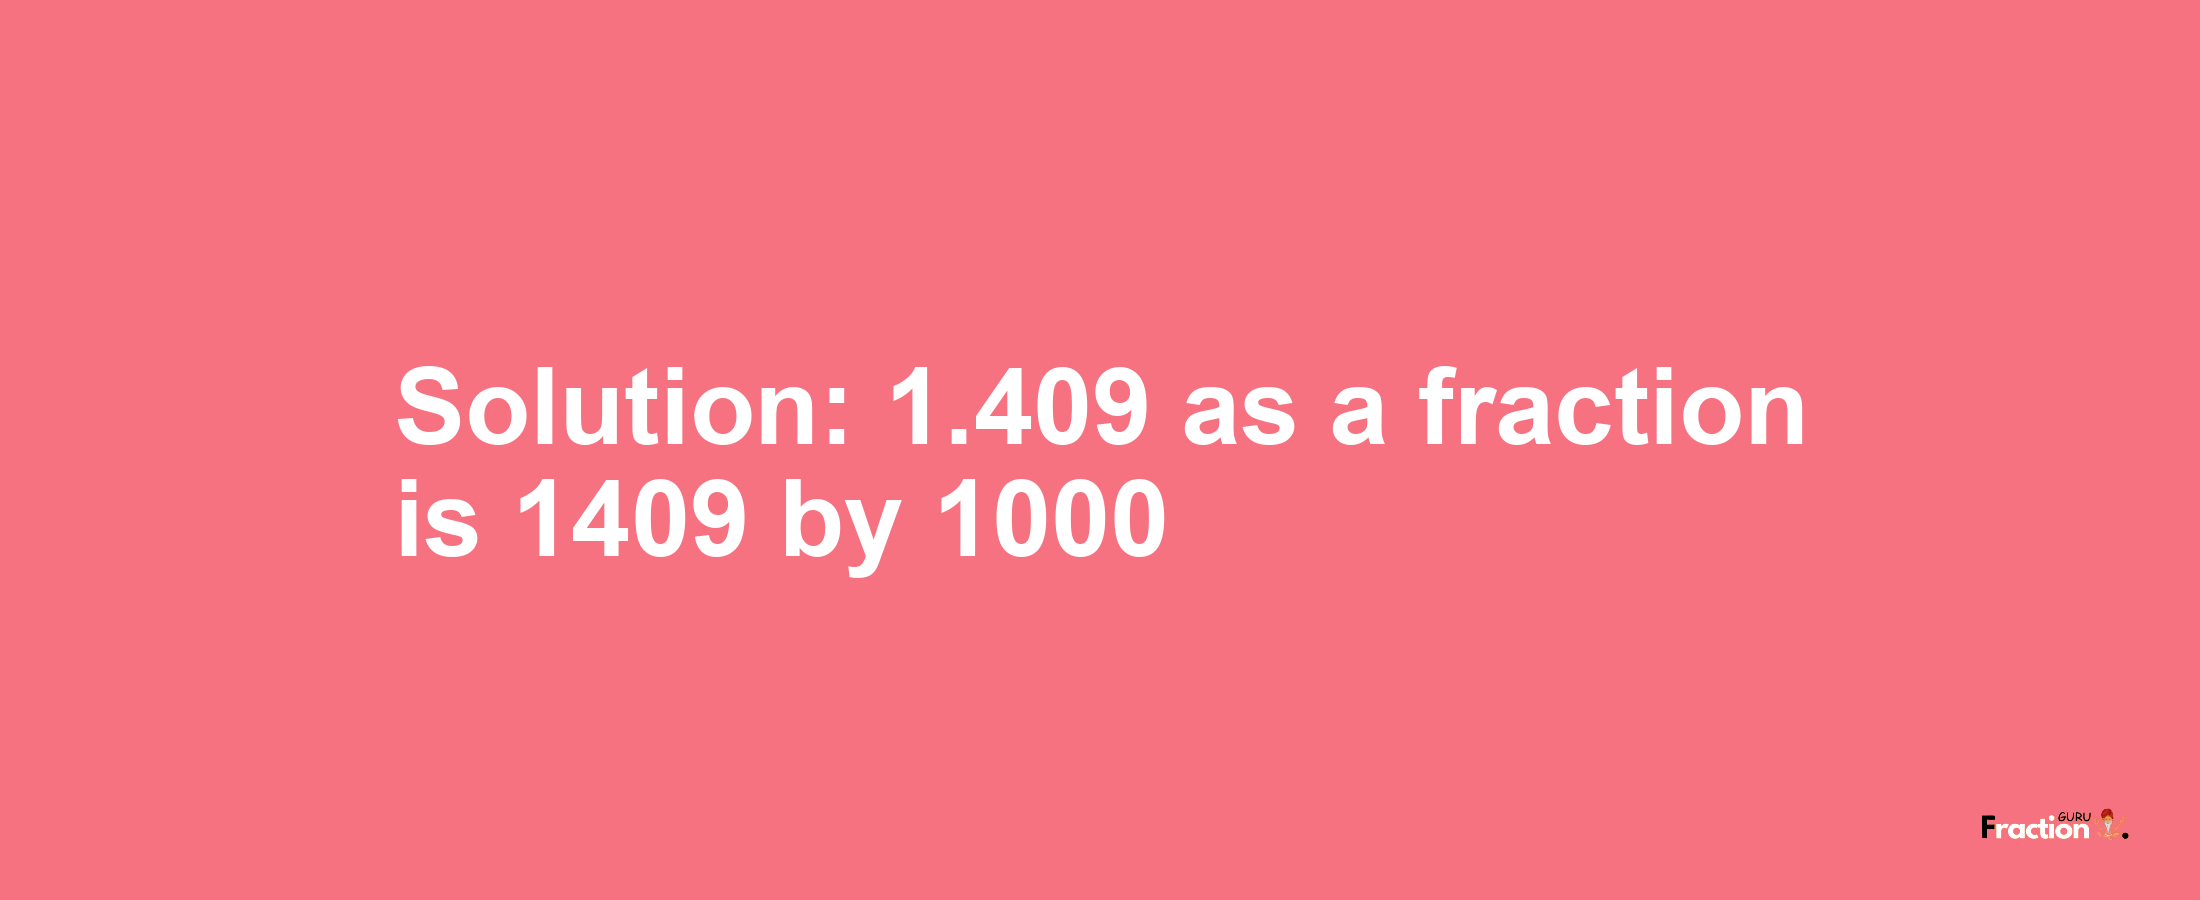 Solution:1.409 as a fraction is 1409/1000